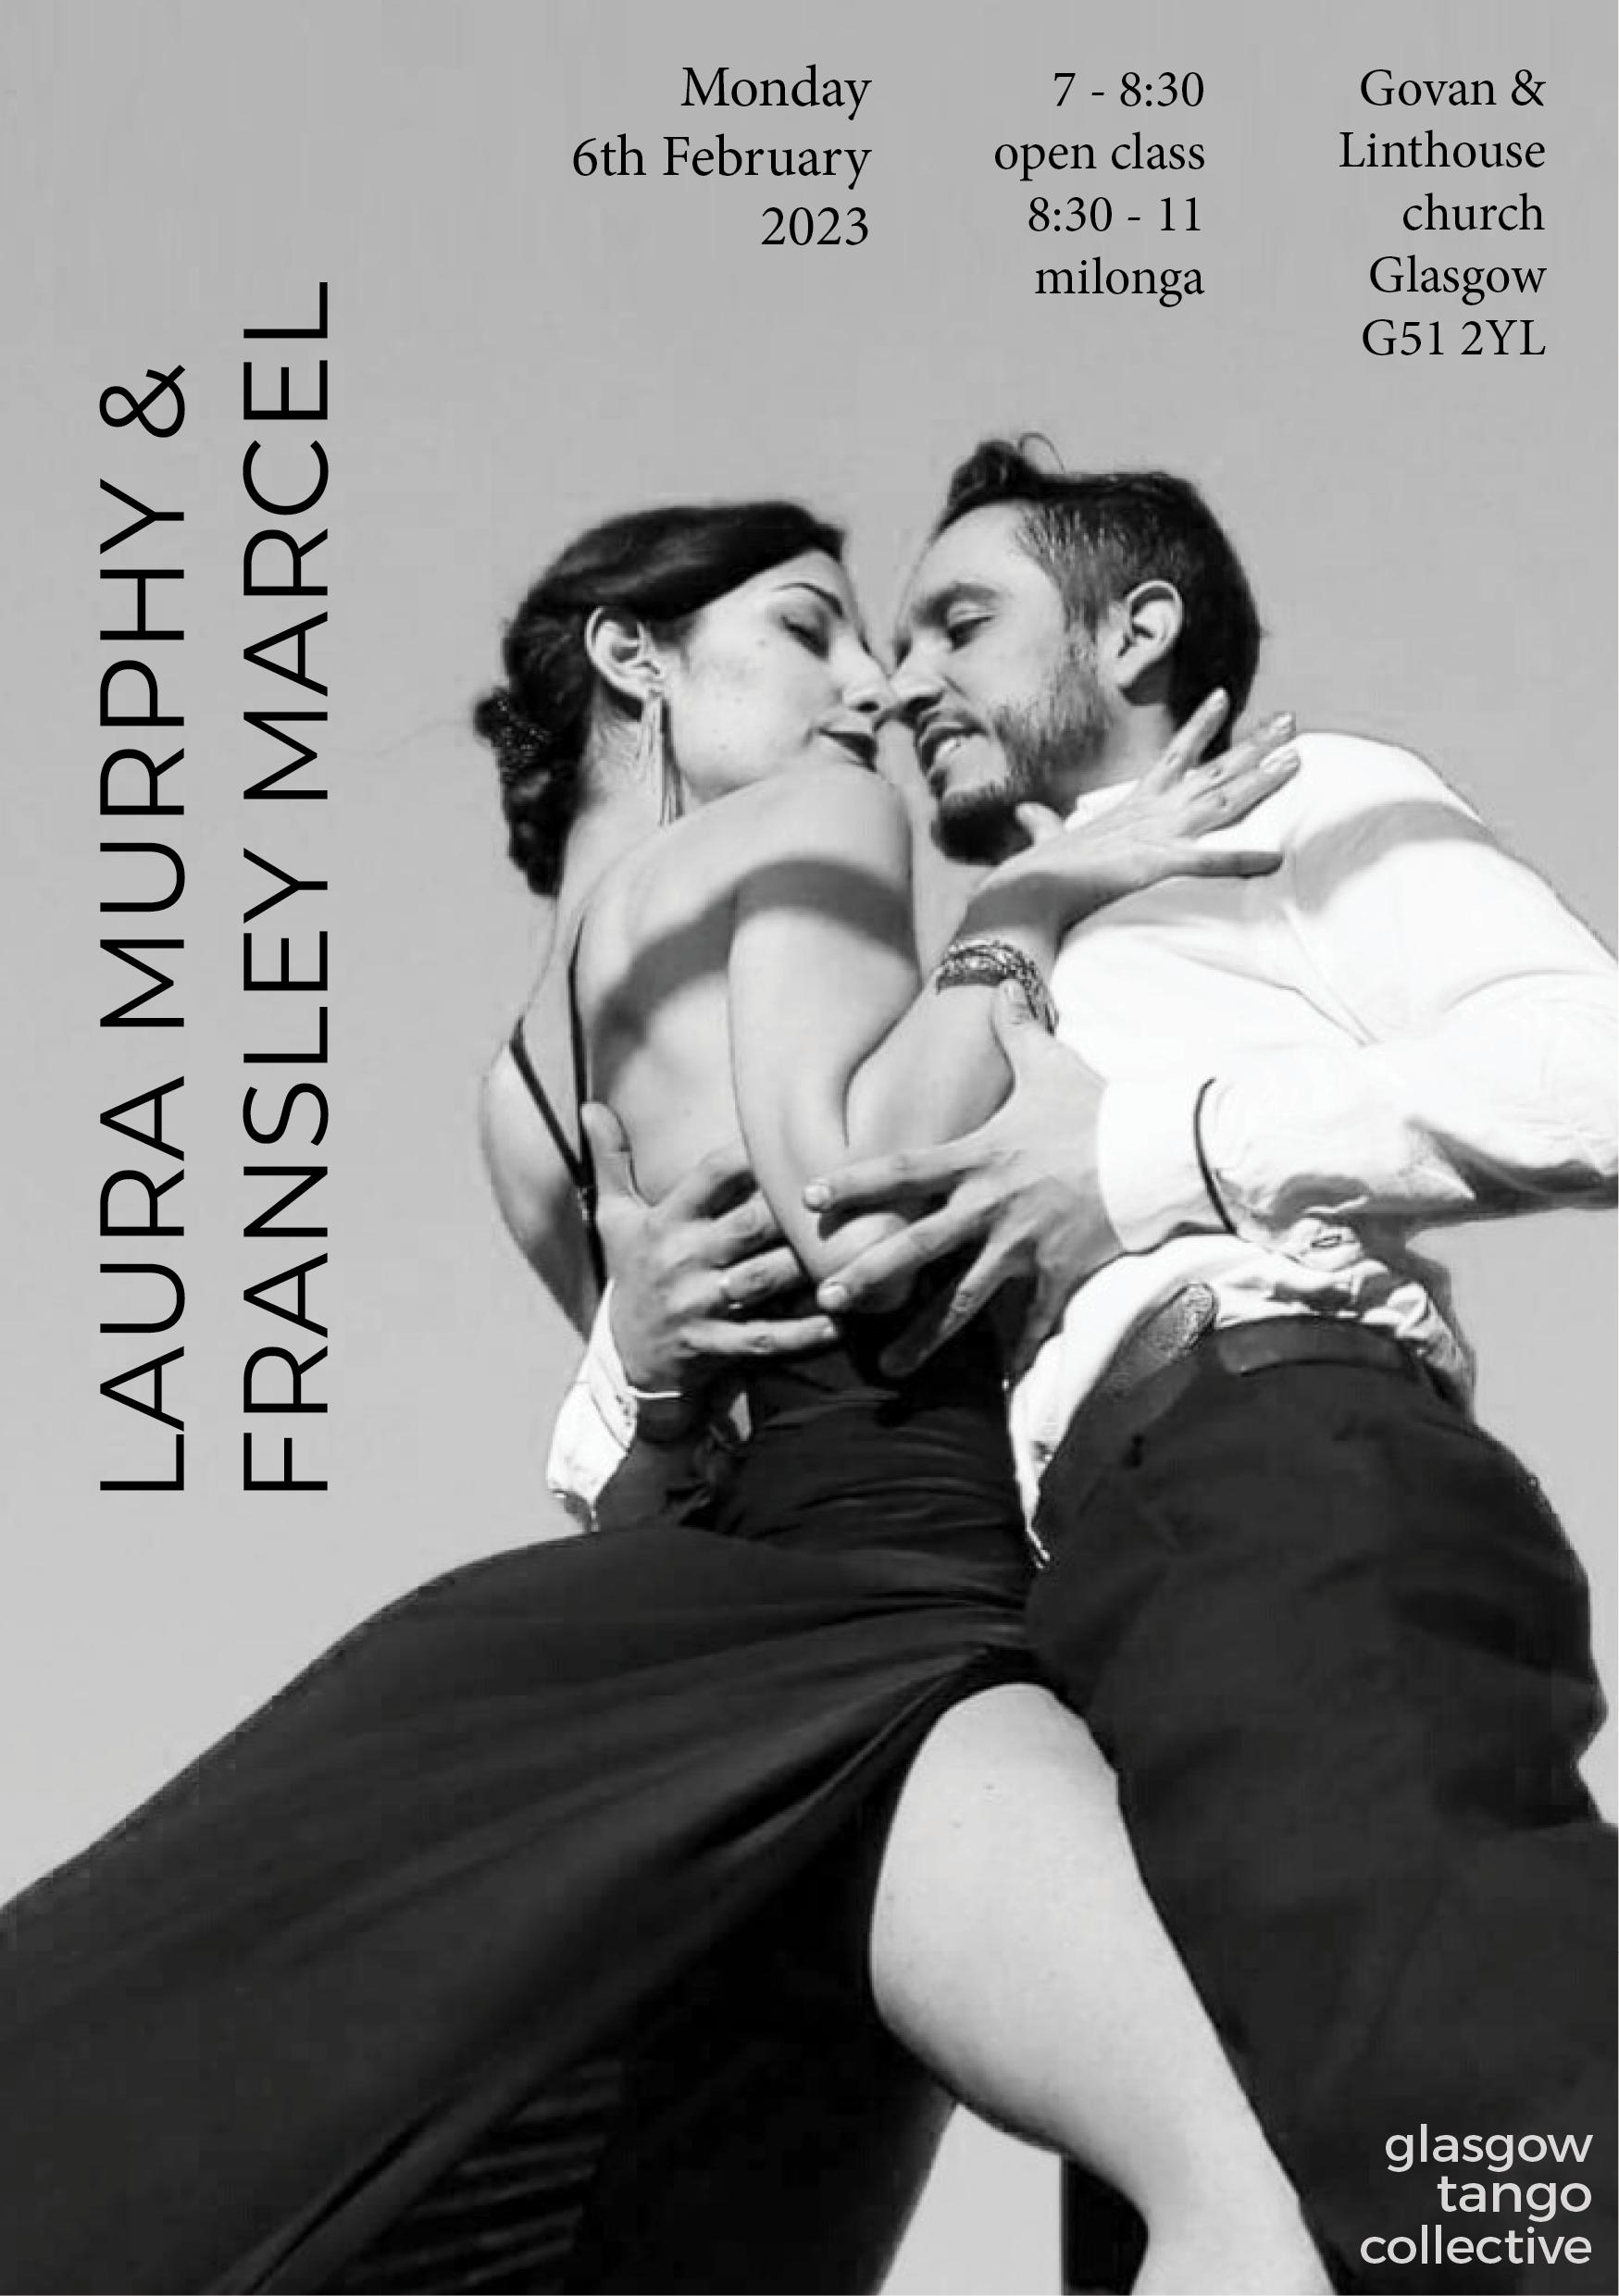 Fransley Marcel and Laura Murphy are teaching tango in Glasgow on Monday 6th February 2023